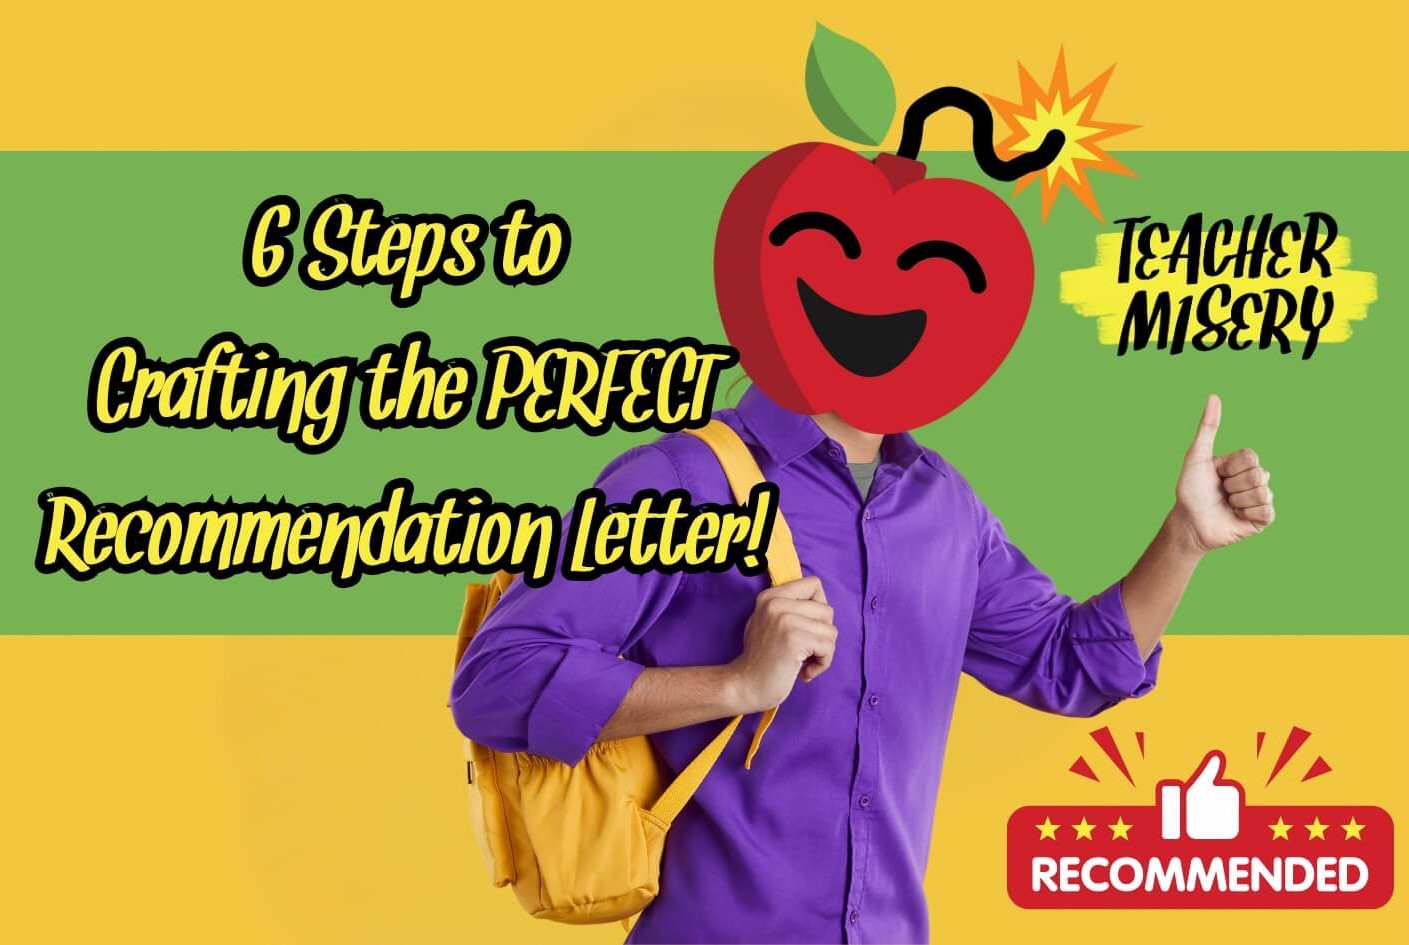 How to Write a Teacher Recommendation Letter: A Step-by-Step Guide